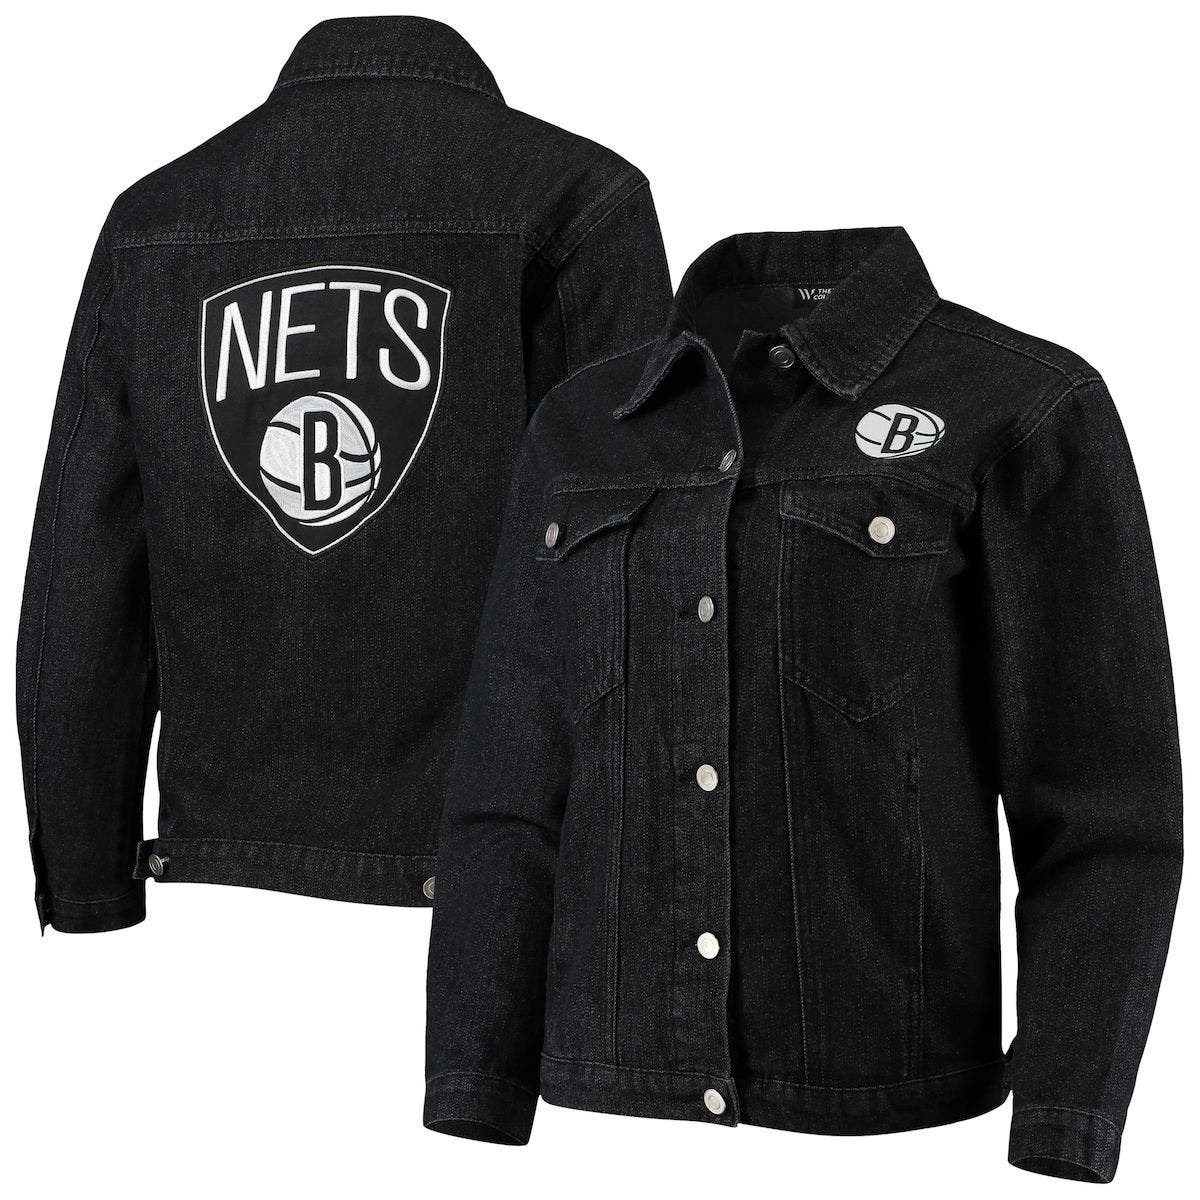 THE WILD COLLECTIVE Women's The Wild Collective Black Brooklyn Nets Patch Denim Button-Up Jacket at Nordstrom